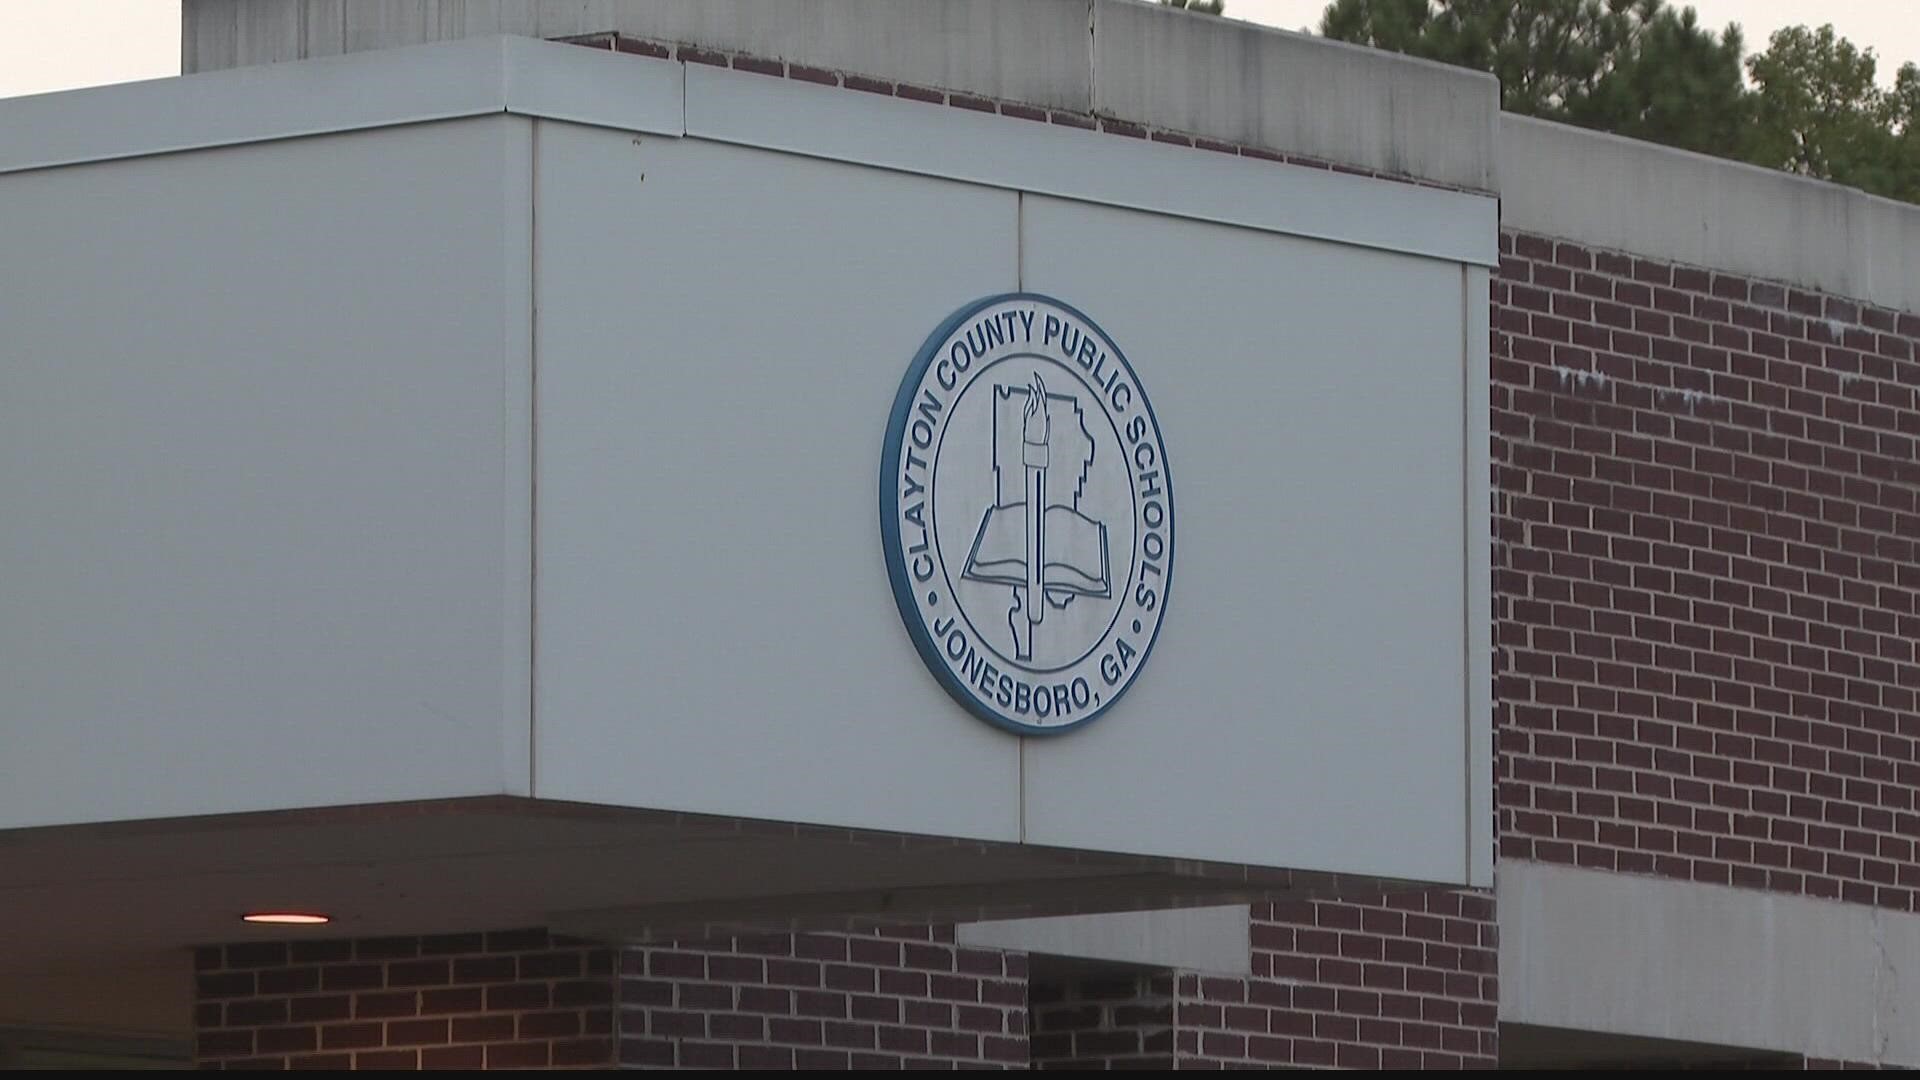 One of the state's largest districts is laying out more of its plan to keep students safe.